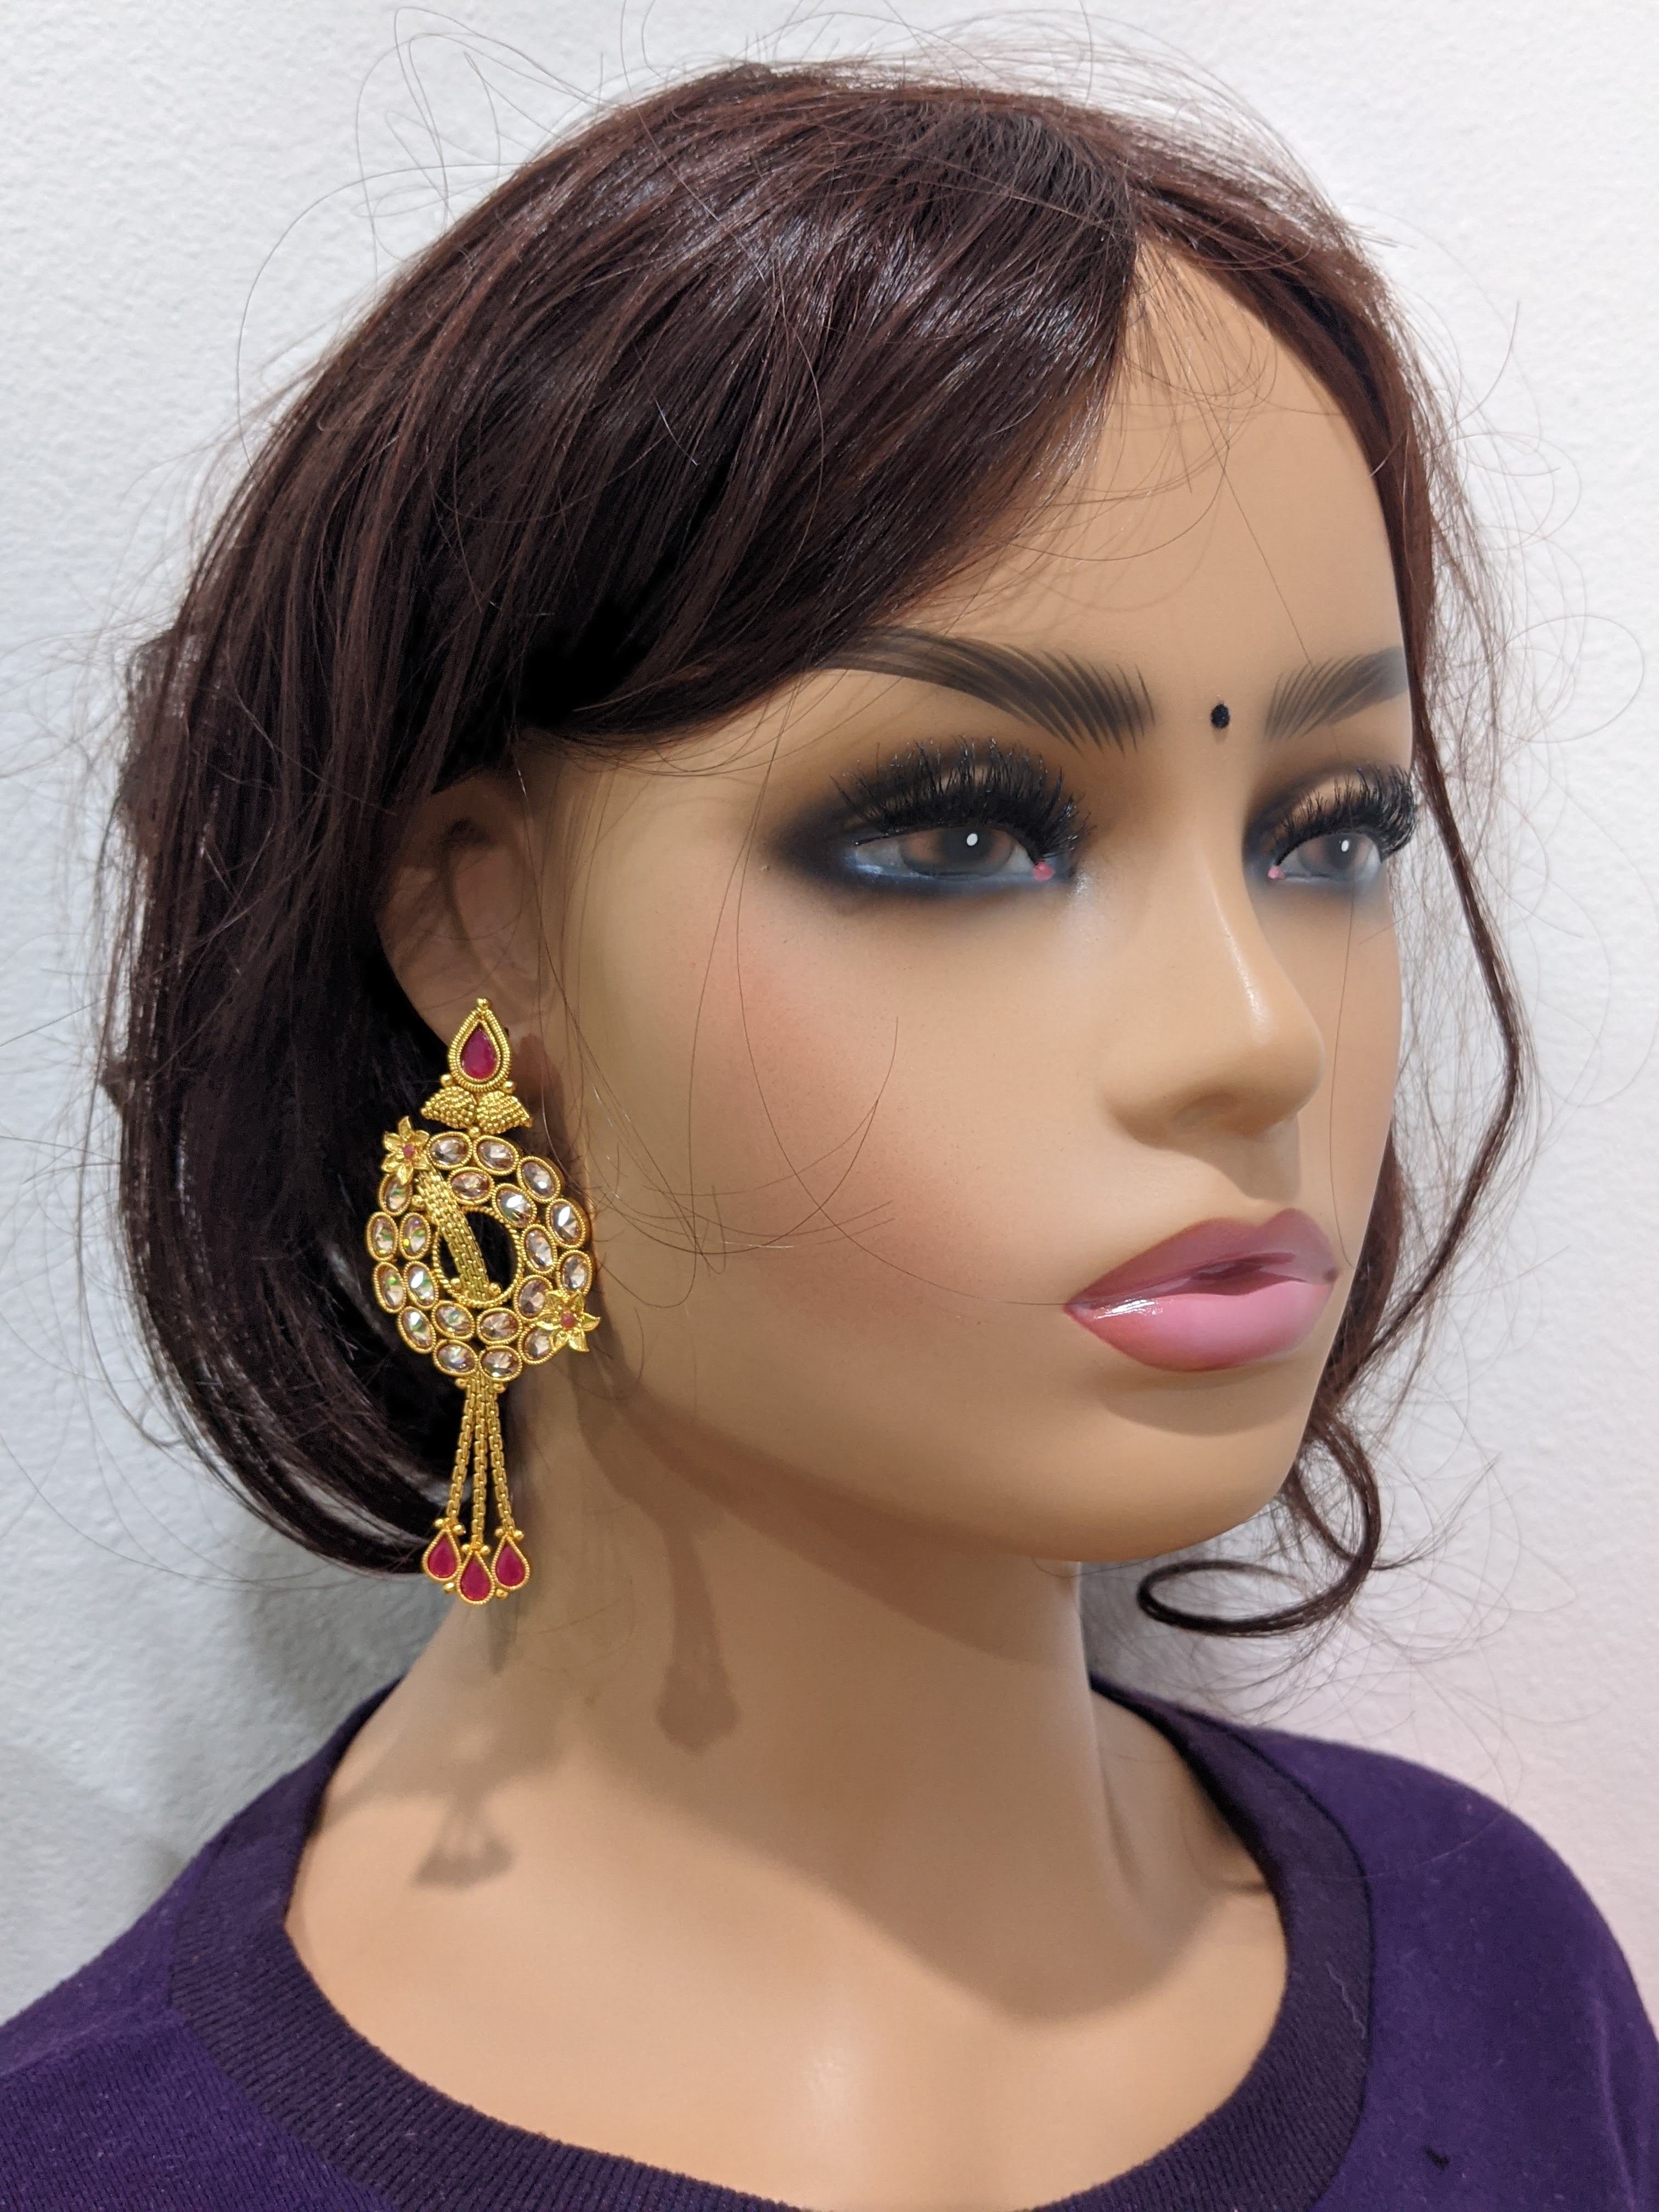 Aggregate 224+ stylish gold earrings for girls best